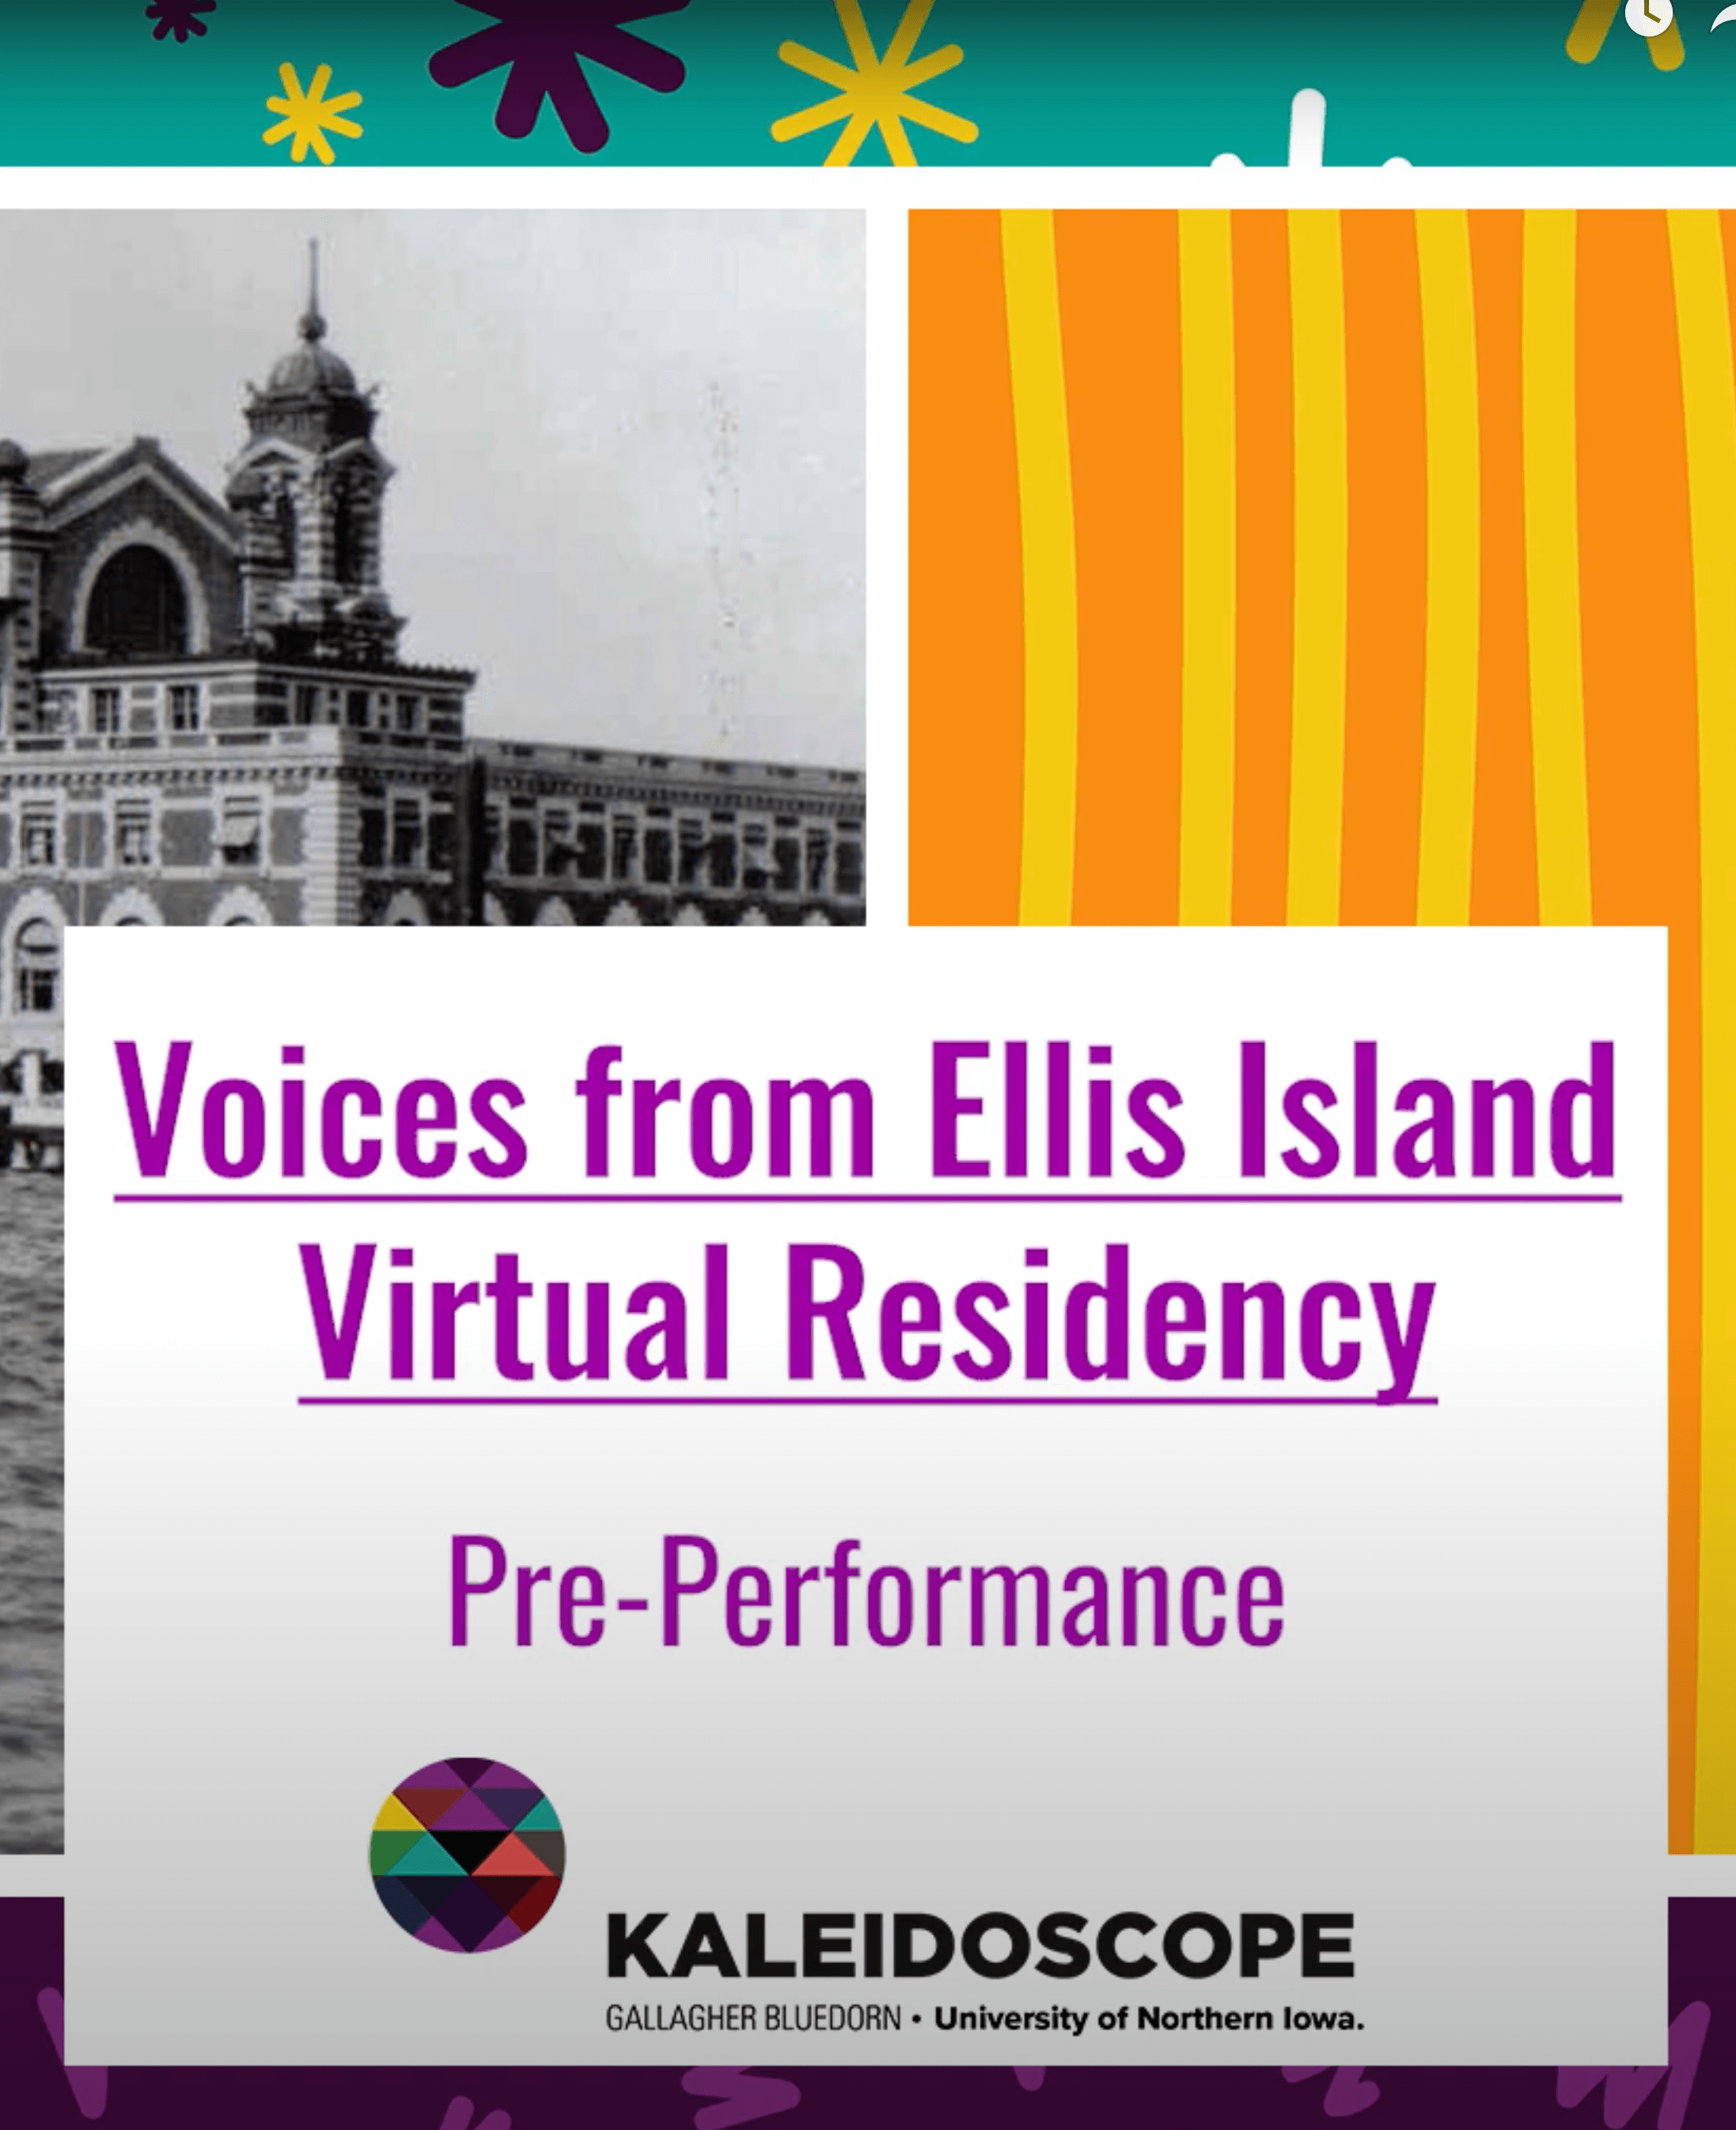 Voices from Ellis Island Virtual Residency Pre-Performance